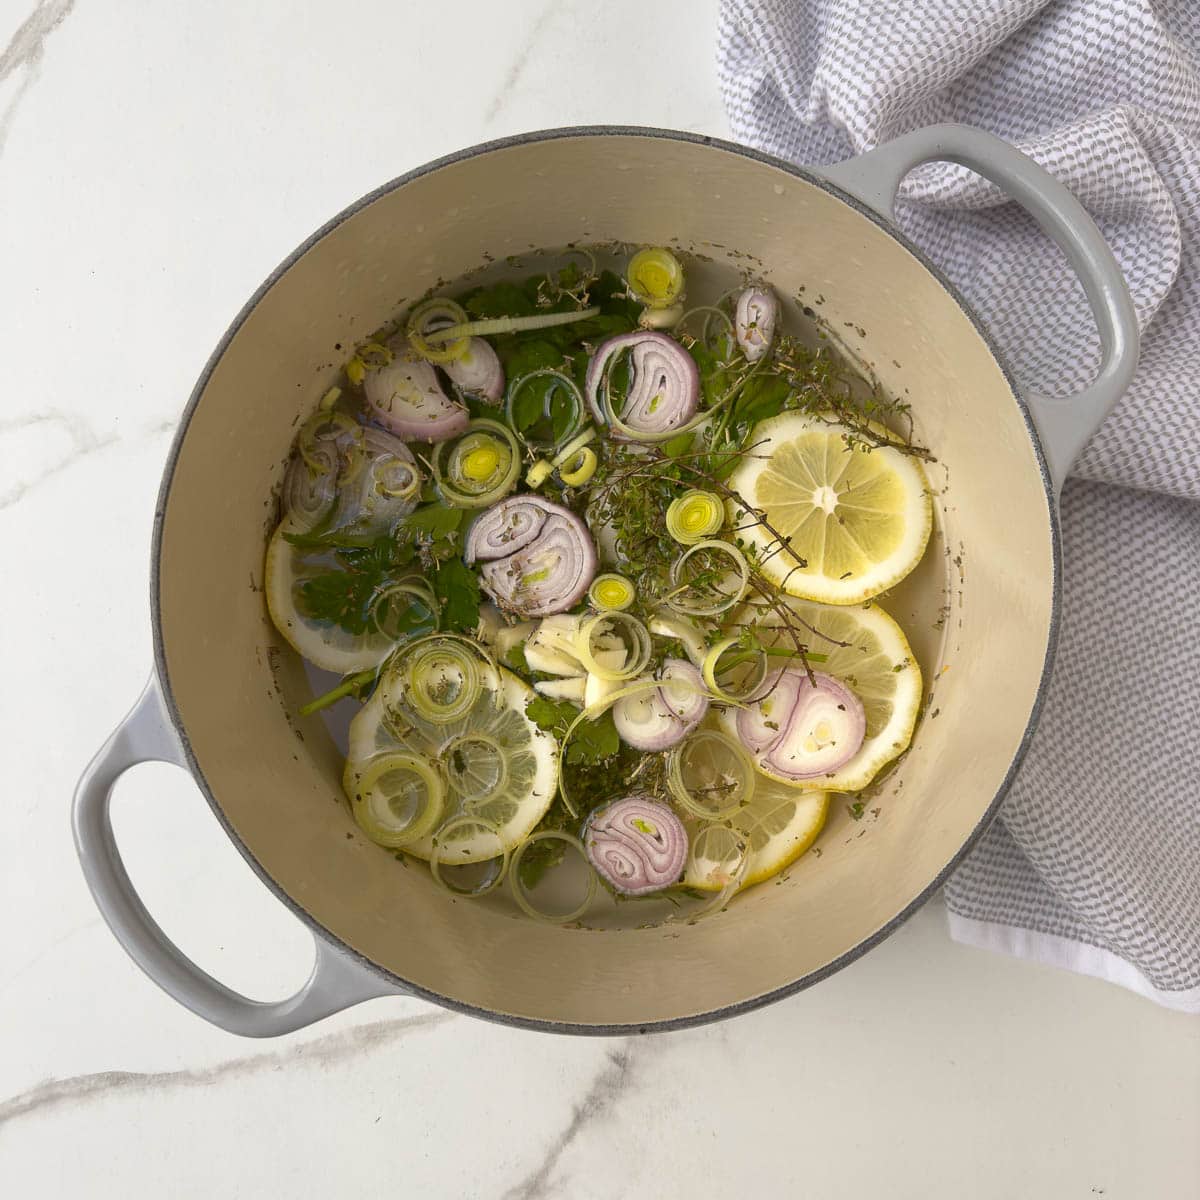 The aromatic steaming liquid to steam salmon with herbs, lemon, and shallots. 